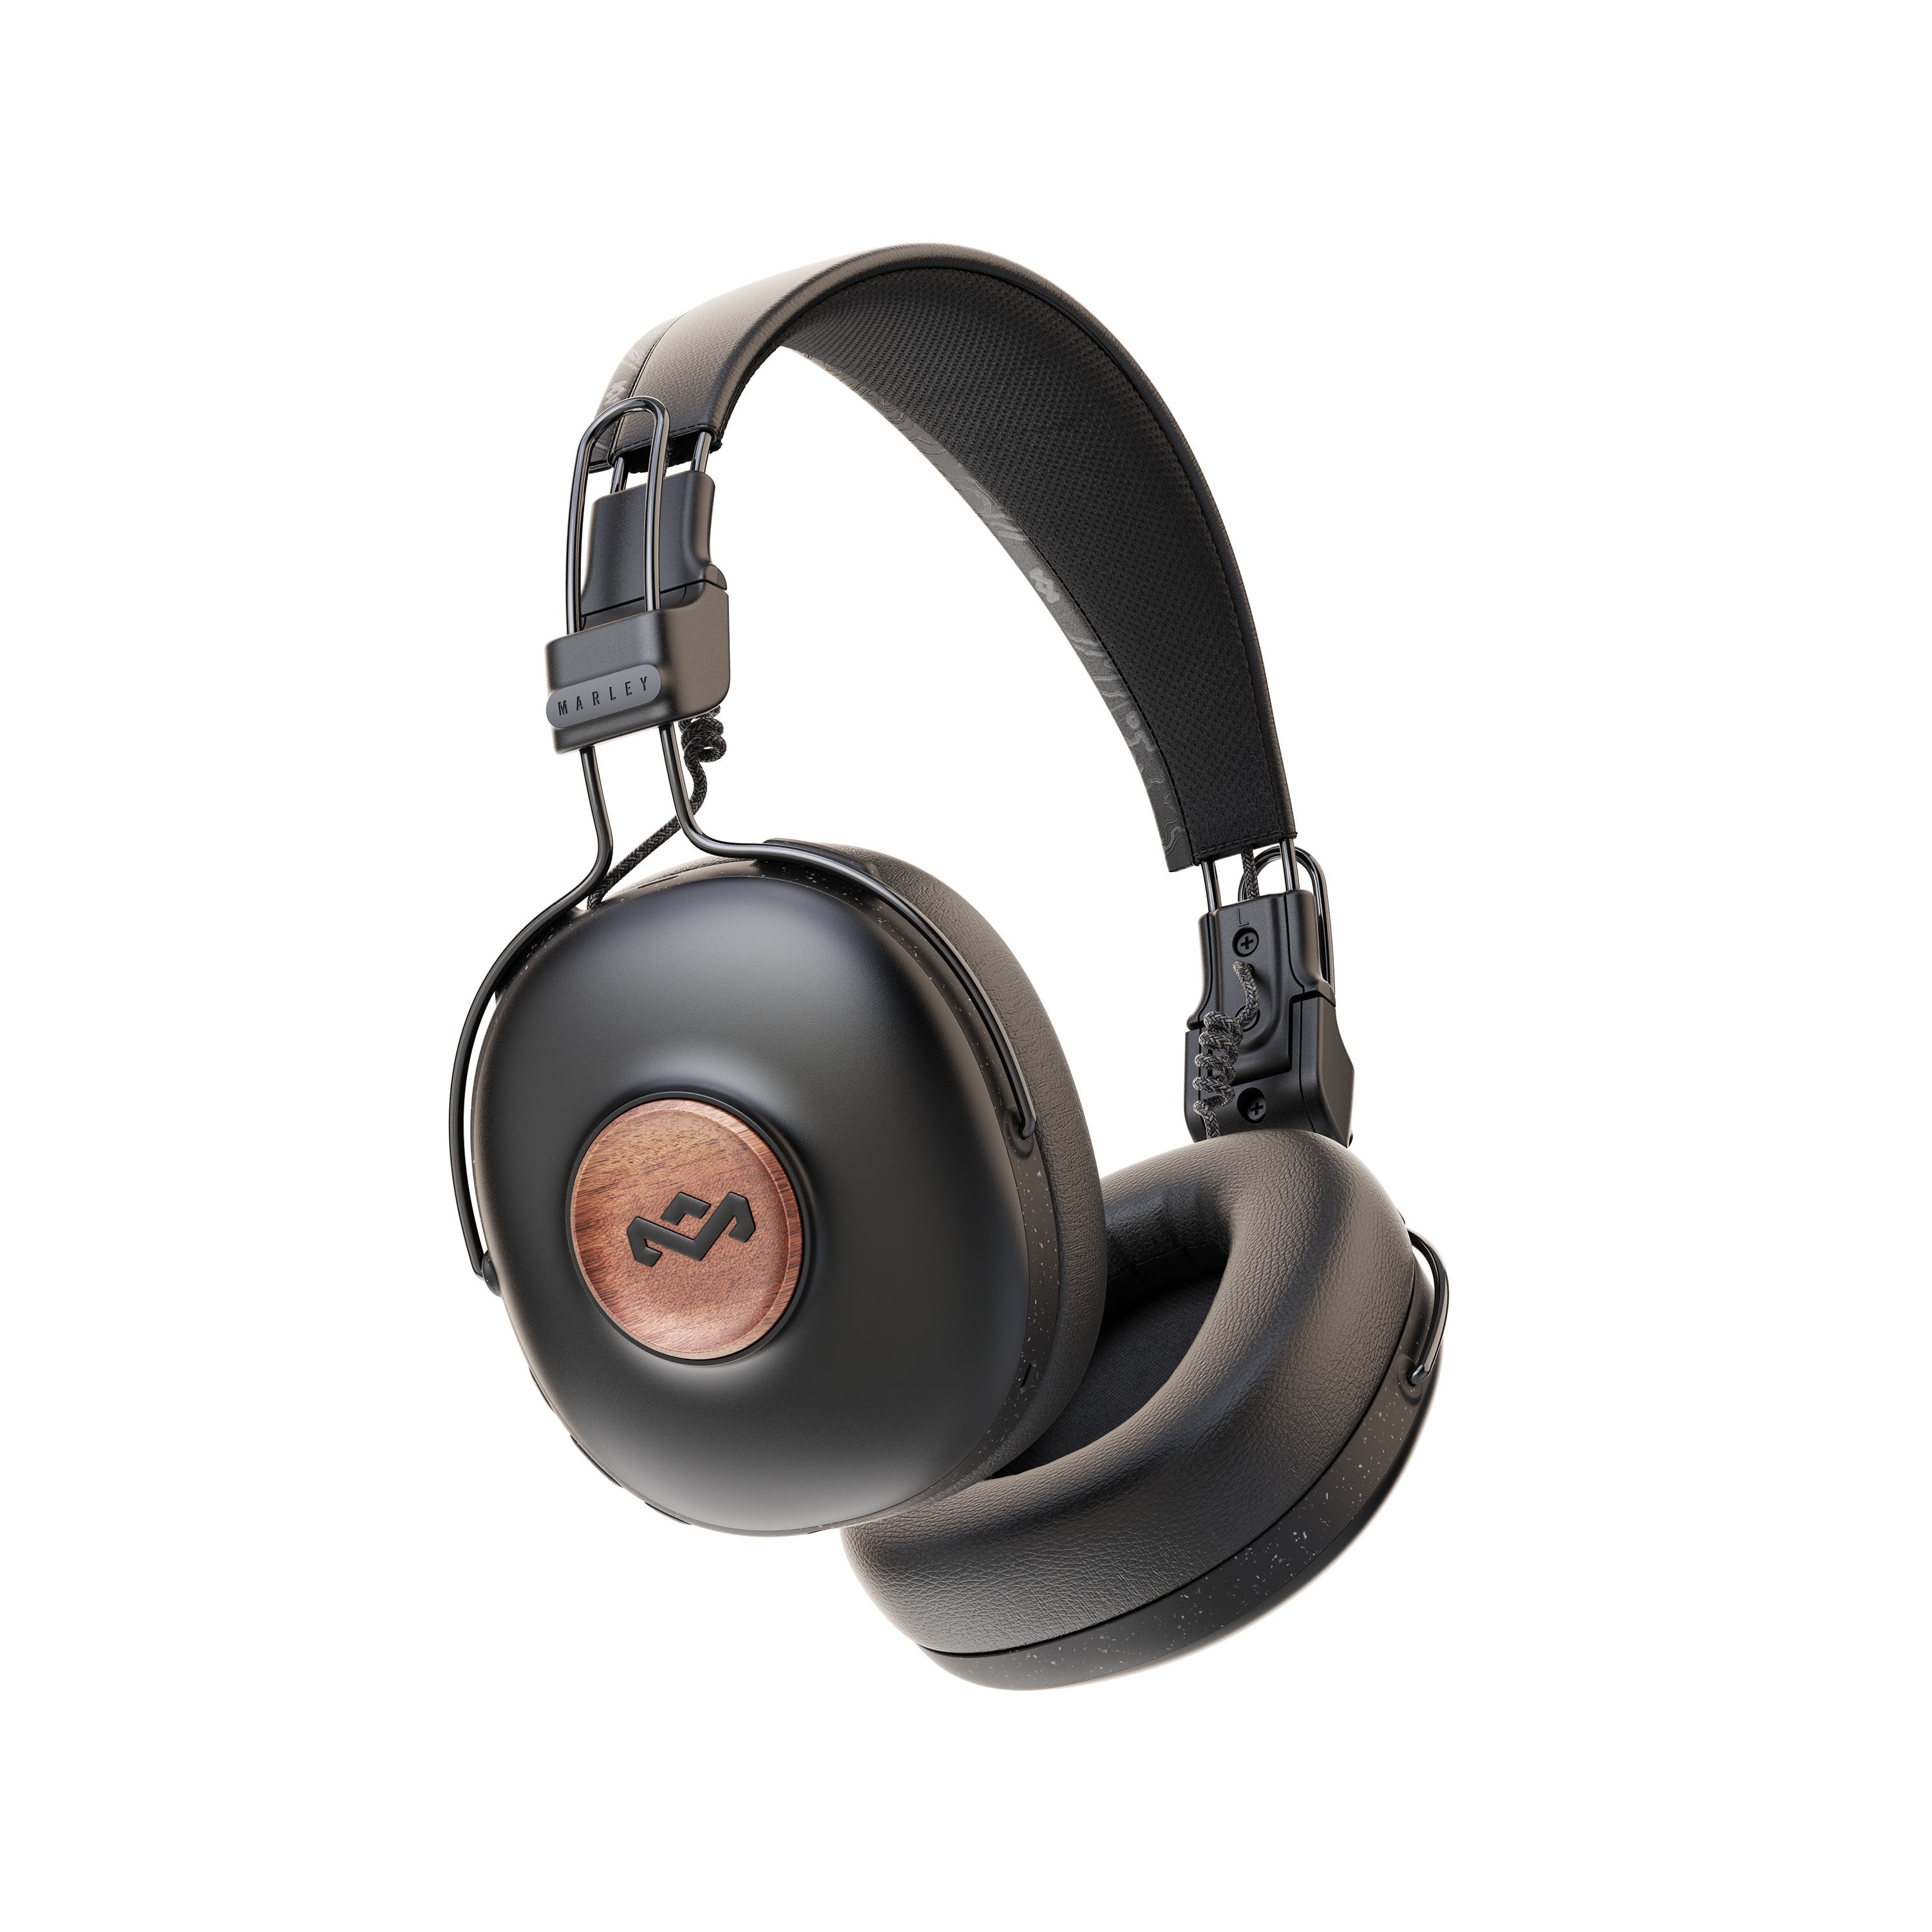 Positive Vibration Frequency Over-Ear Headphones Signature Black